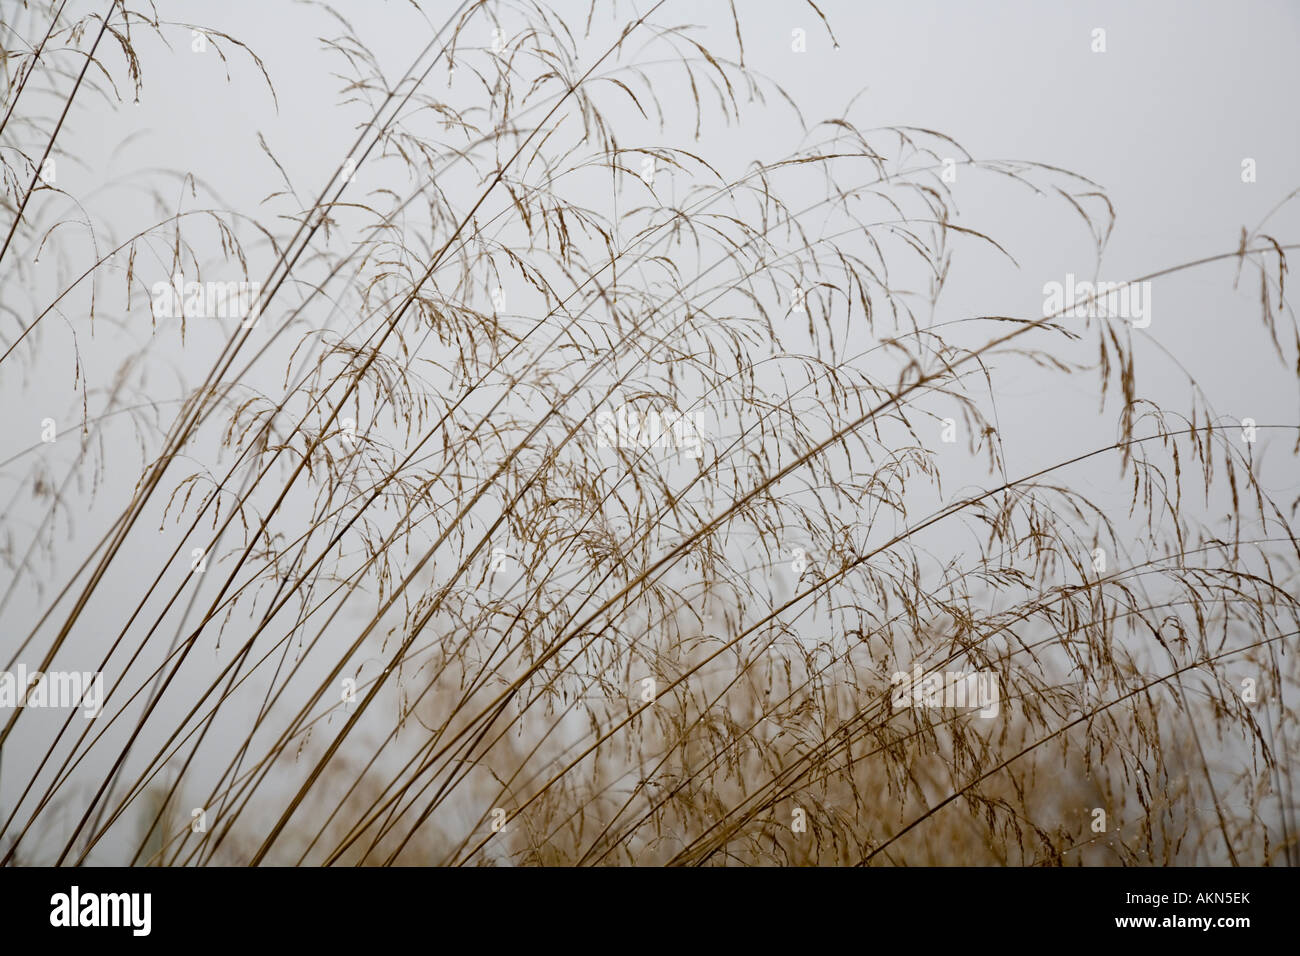 Heads of Deschampsia caespitosa weighed down by water droplets in the autumn fog Stock Photo